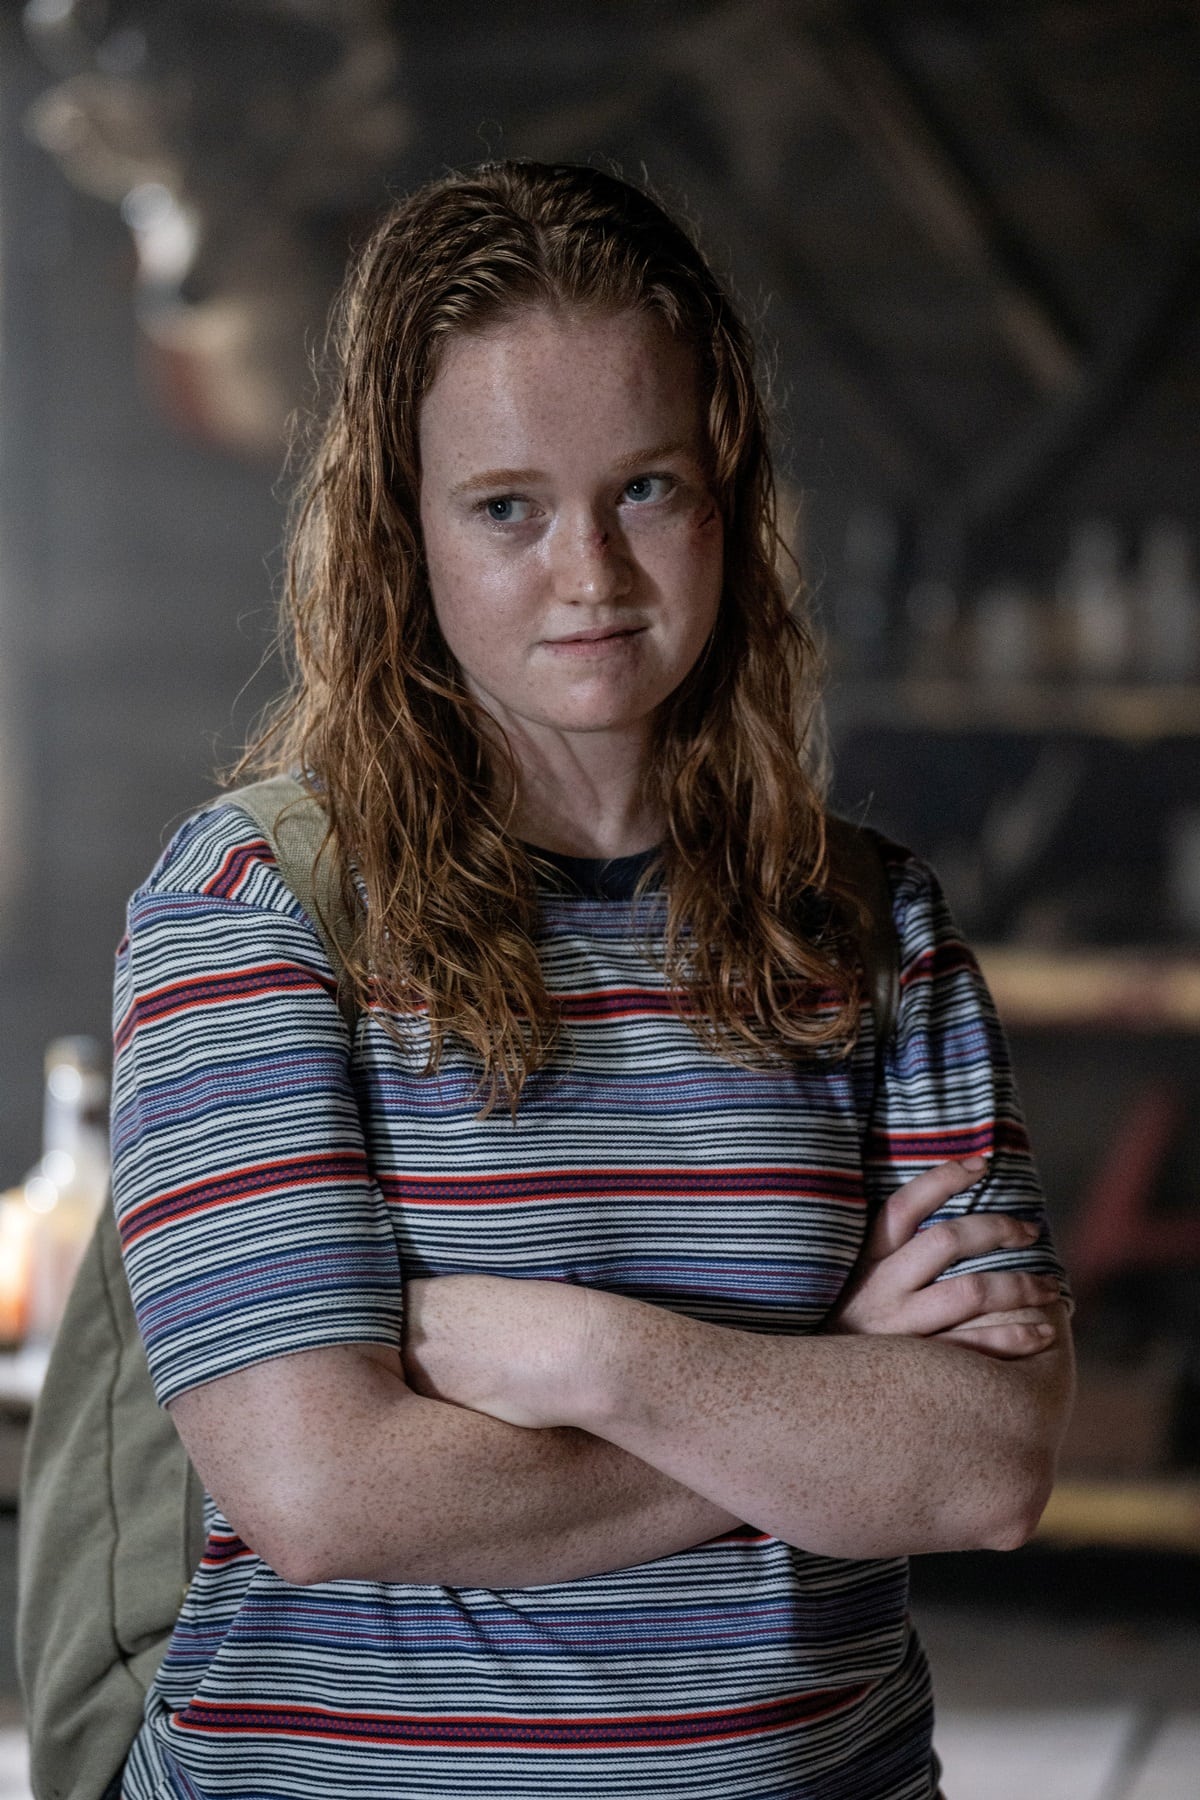 In the Showtime original series Yellowjackets, the character Vanessa Palmer, also known as "Van," is played by Liv Hewson during her teenage years, and it has been announced that in the second season of the show, she will be portrayed by Lauren Ambrose as an adult